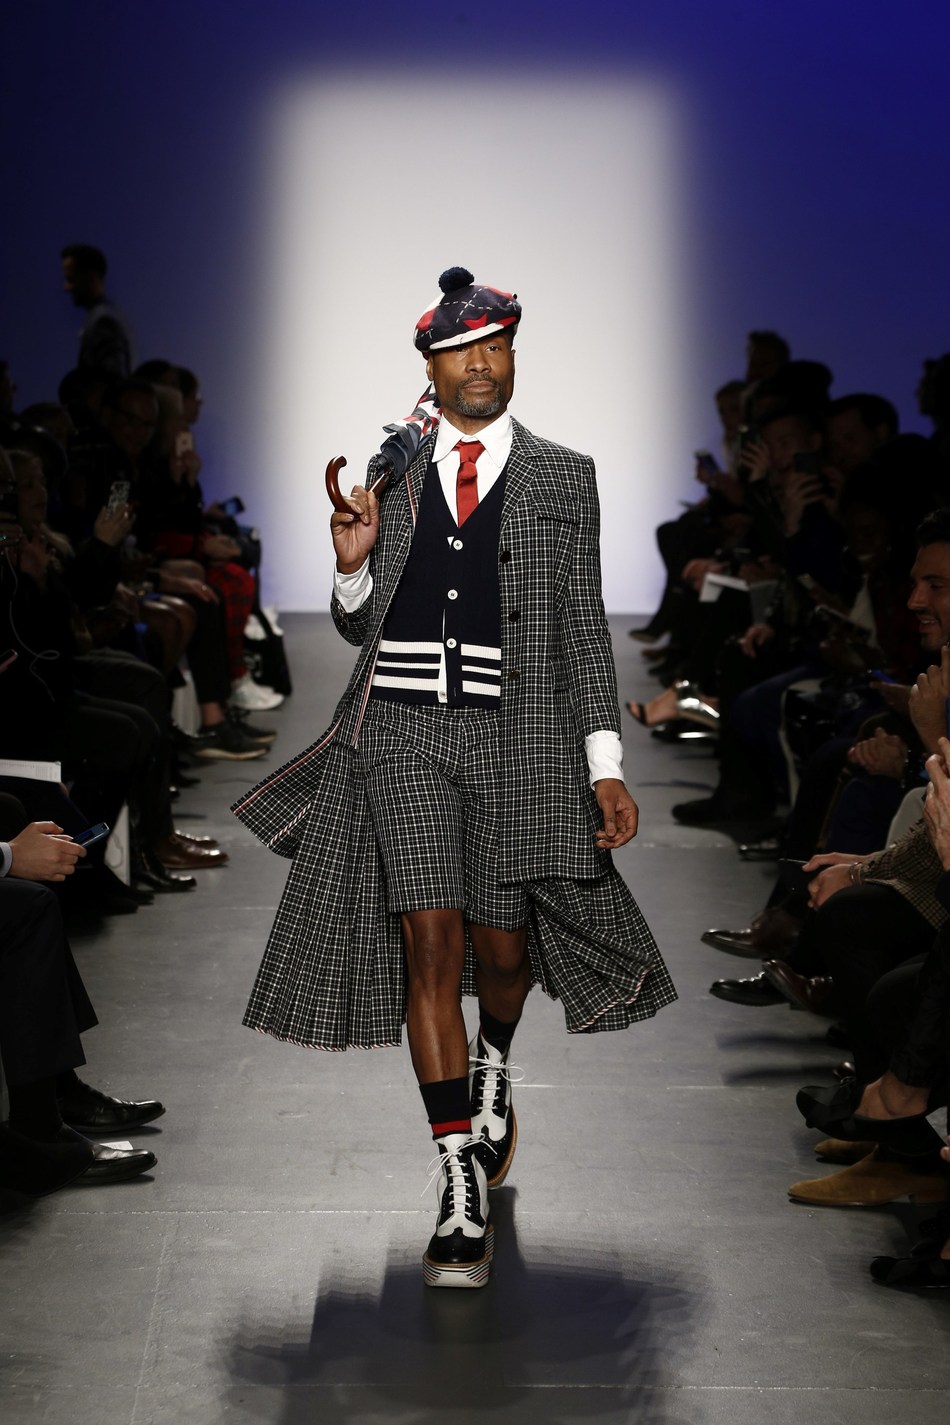 Billy Porter wearing Thom Browne at the Blue Jacket 2019 runway show during NYFW